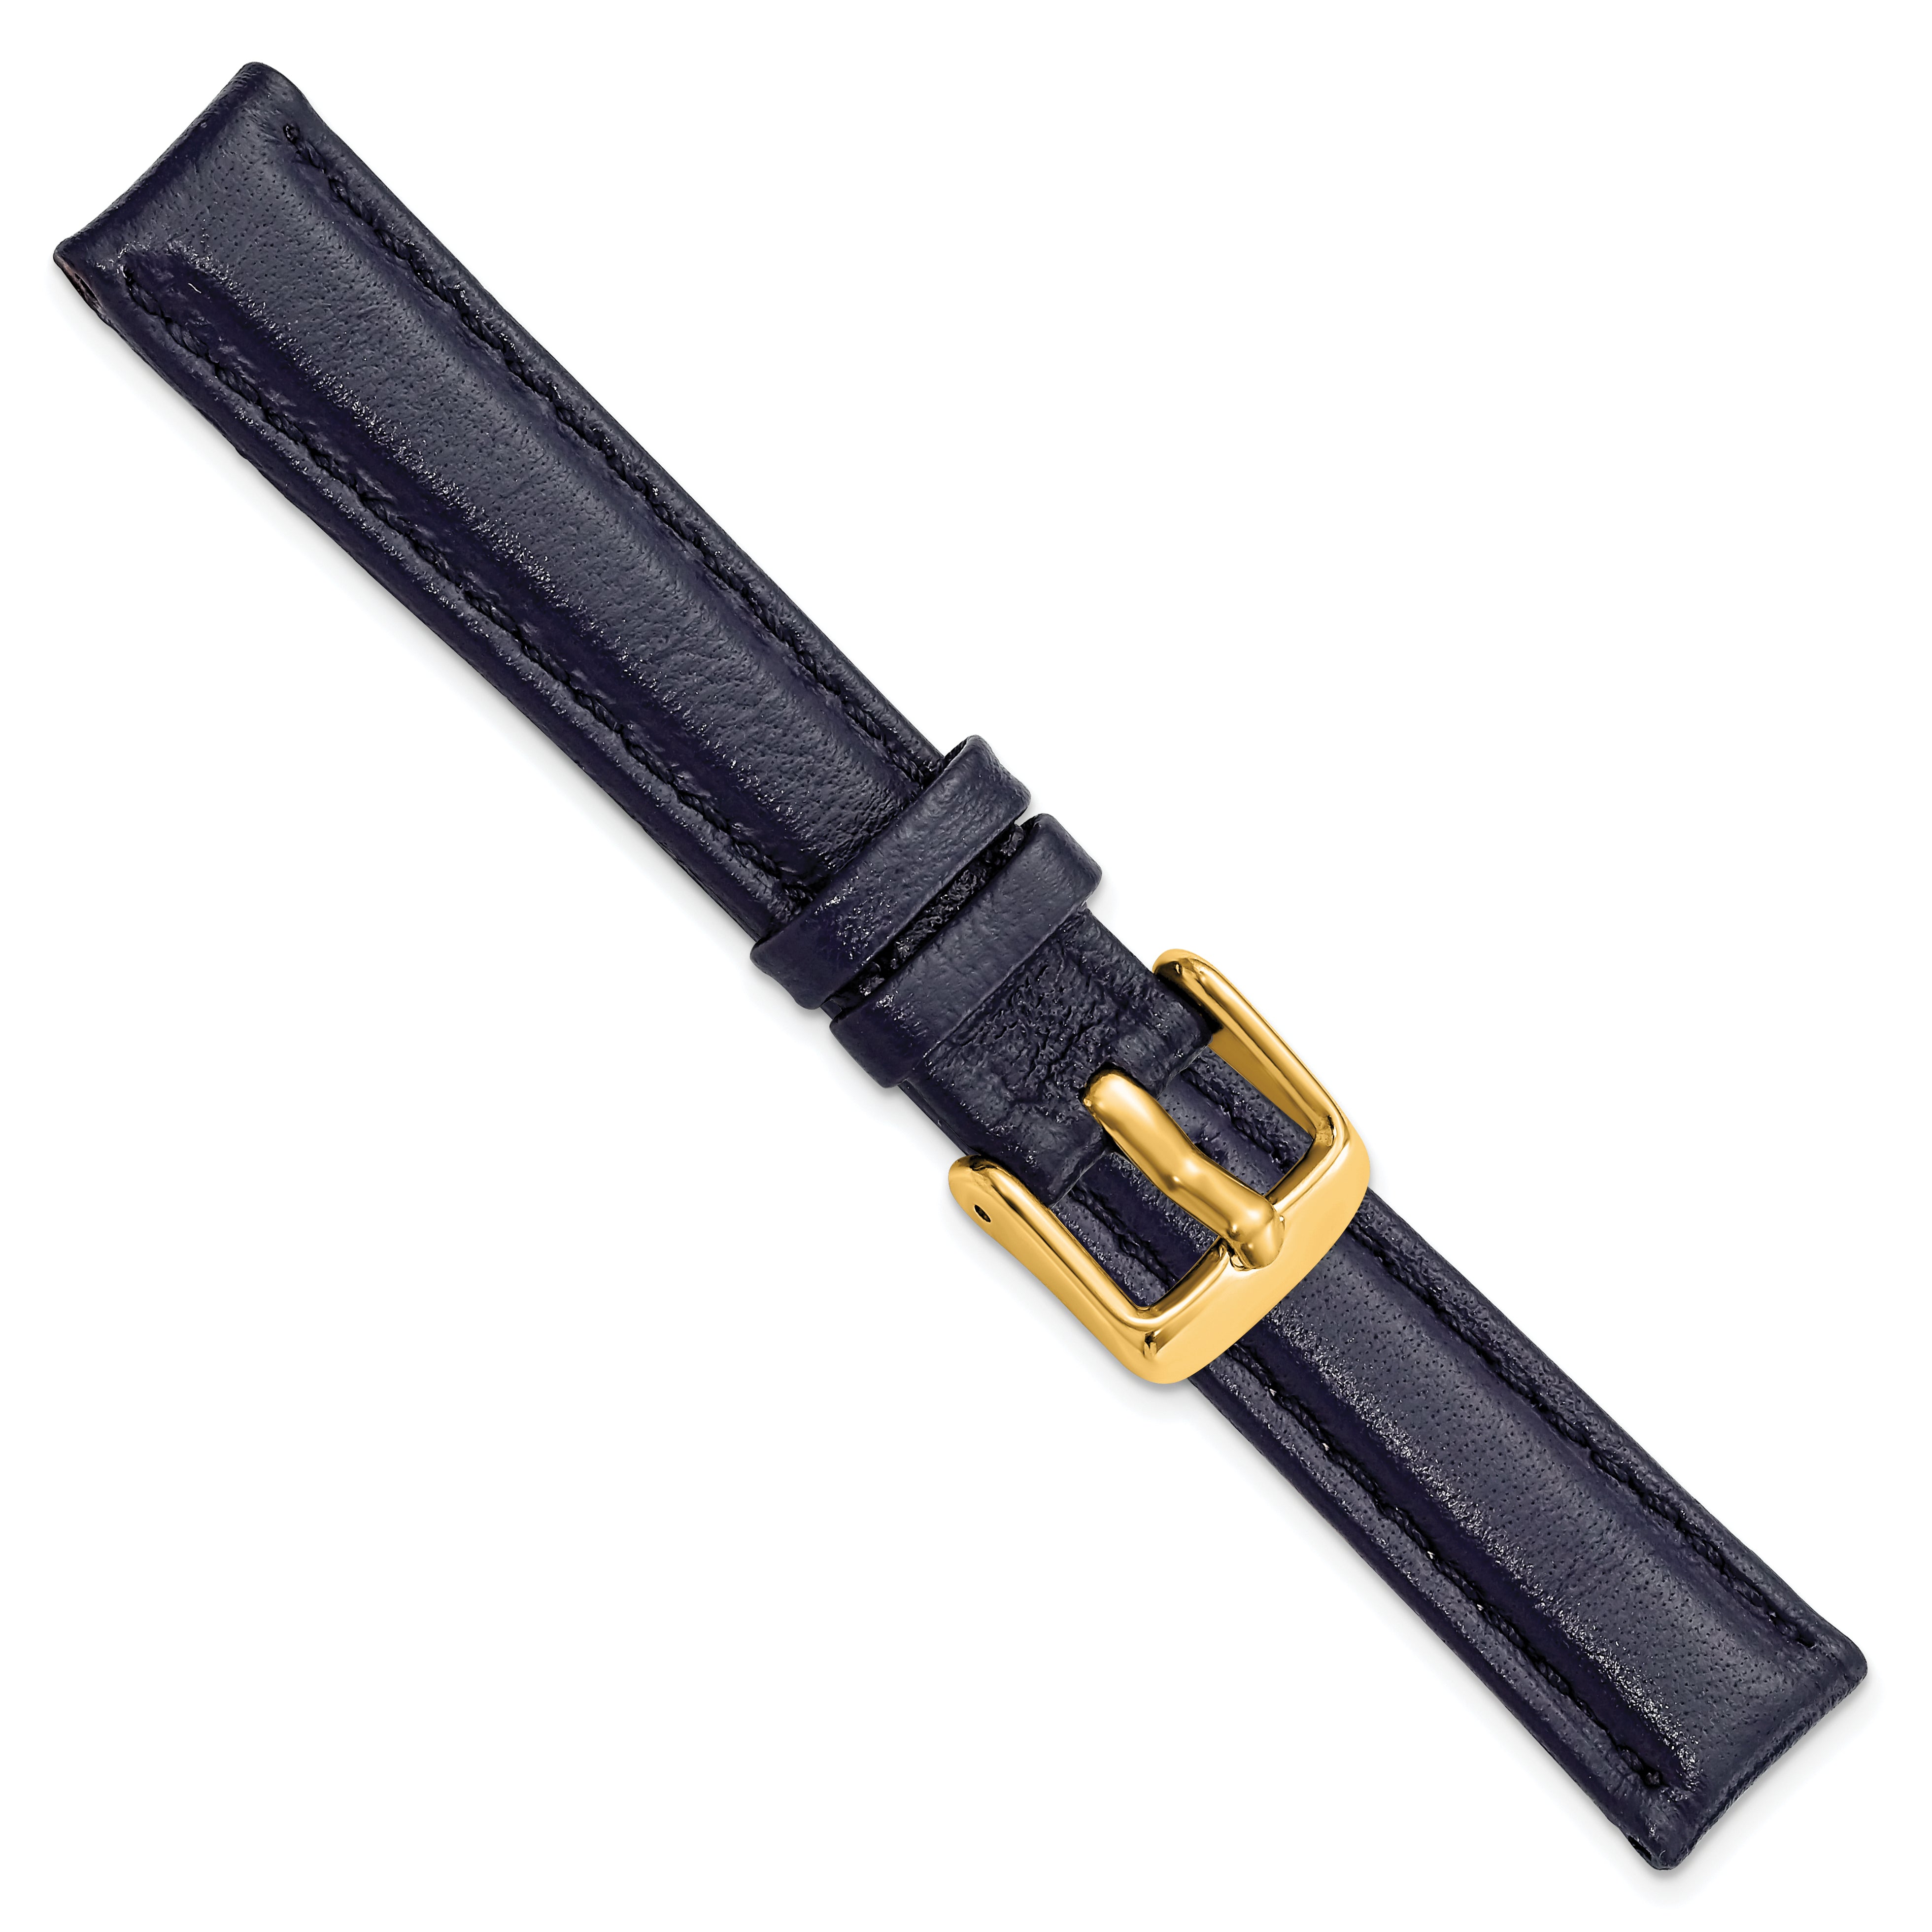 14mm Navy Glove Leather with Gold-tone Panerai Style Buckle 6.75 inch Watch Band